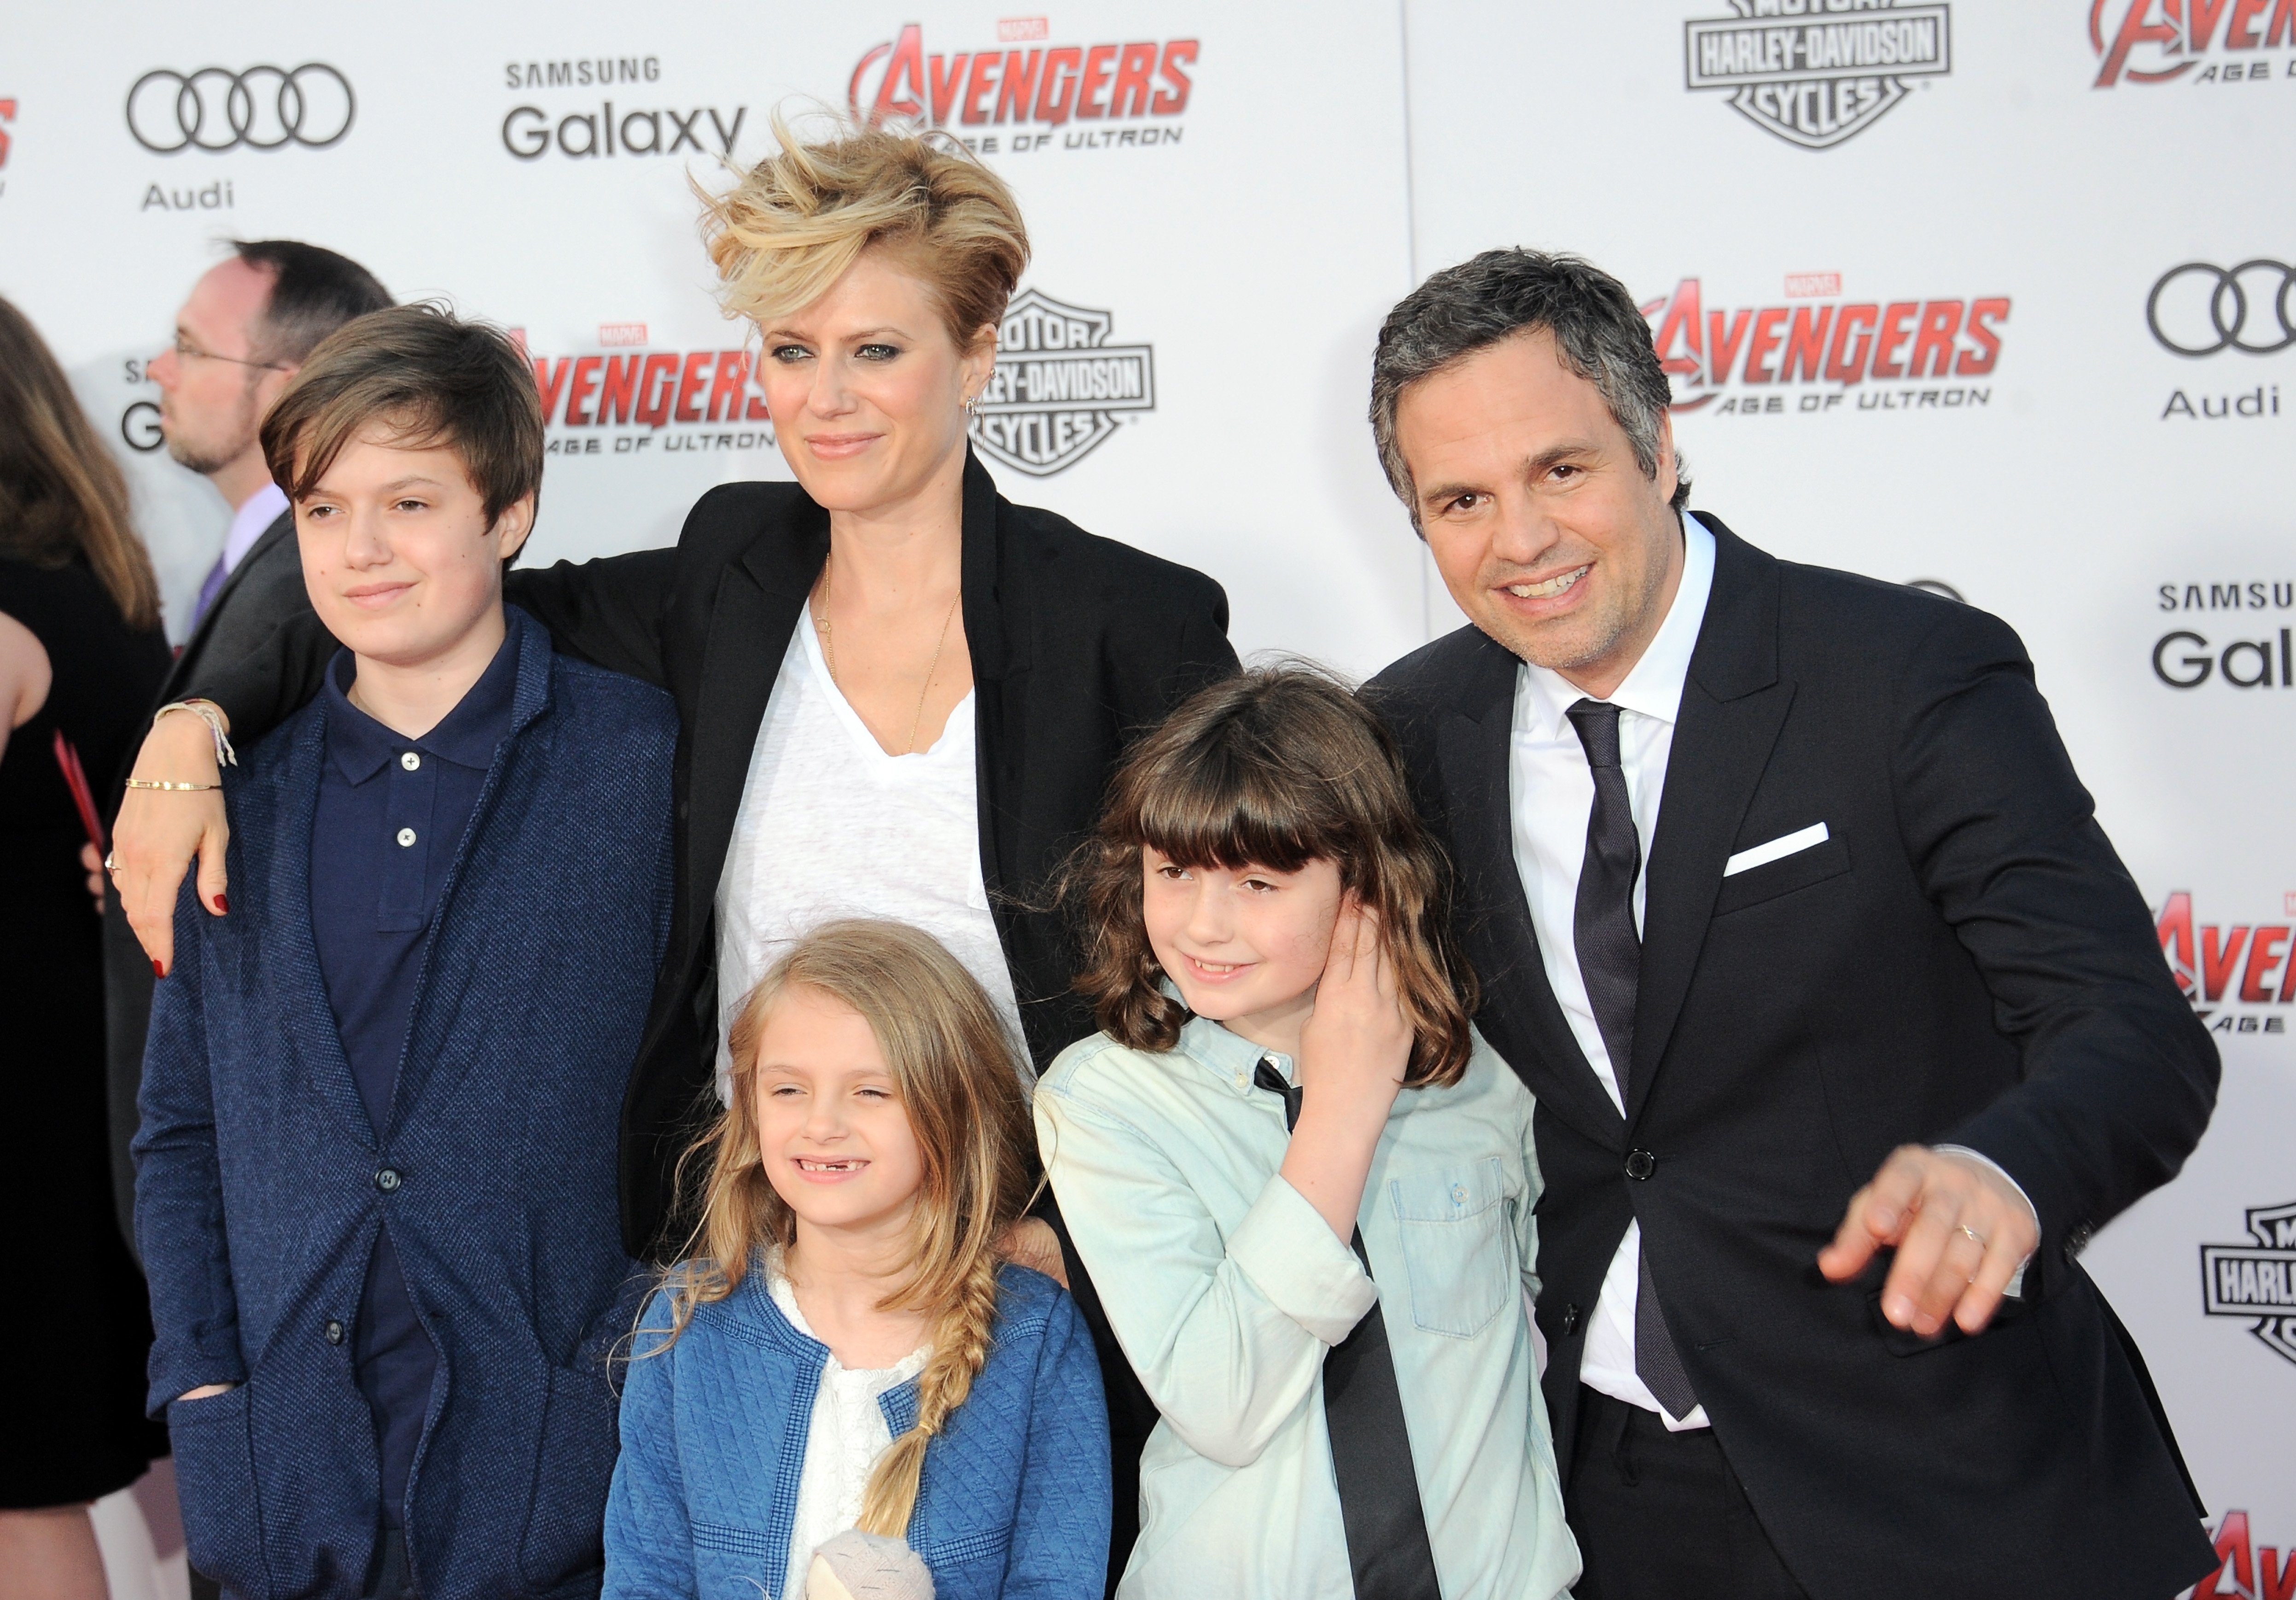 Actor Mark Ruffalo and wife, Sunrise Coigney with children, Keen Ruffalo, Bella Ruffalo and Odette Ruffalo at the Premiere Of Marvel's "Avengers Age Of Ultron" held at Dolby Theatre on April 13, 2015 in Hollywood, California. | Source: Getty Images